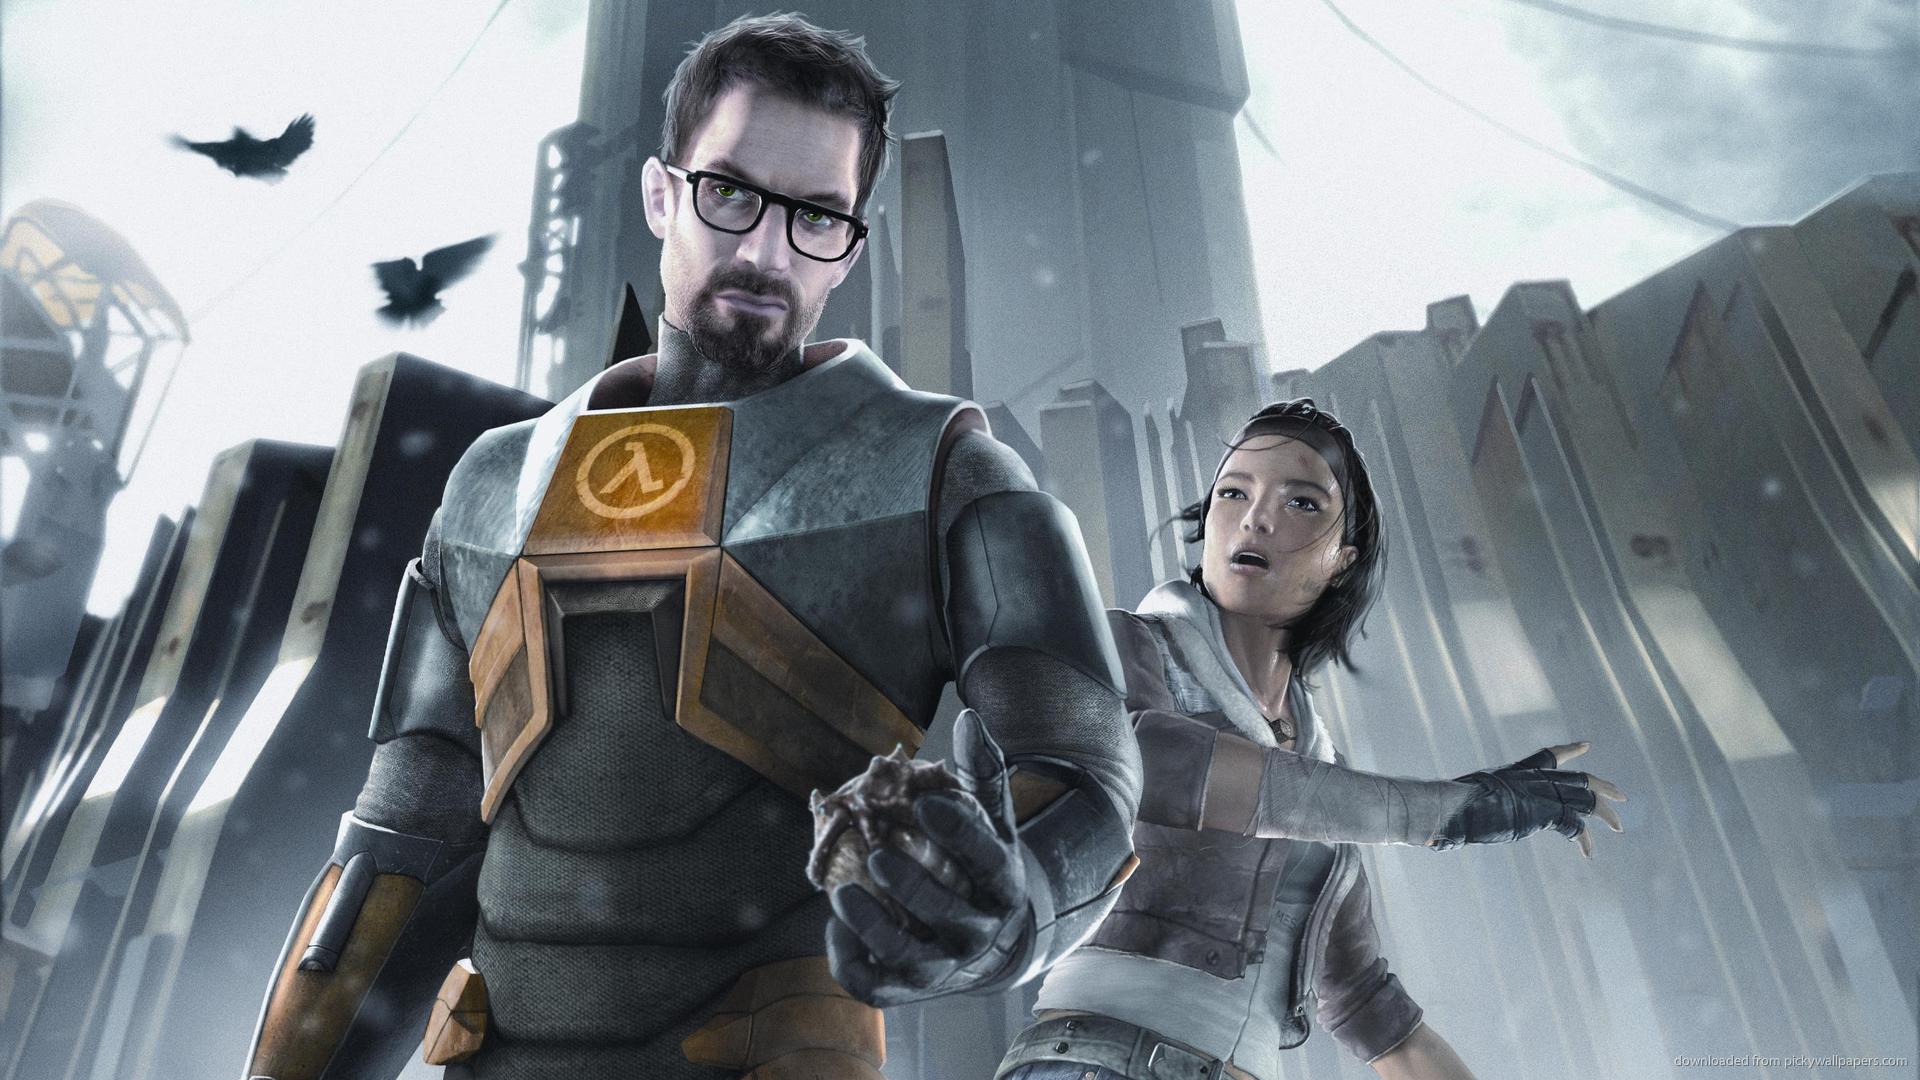 Image for Half-Life 2 is 11 years old